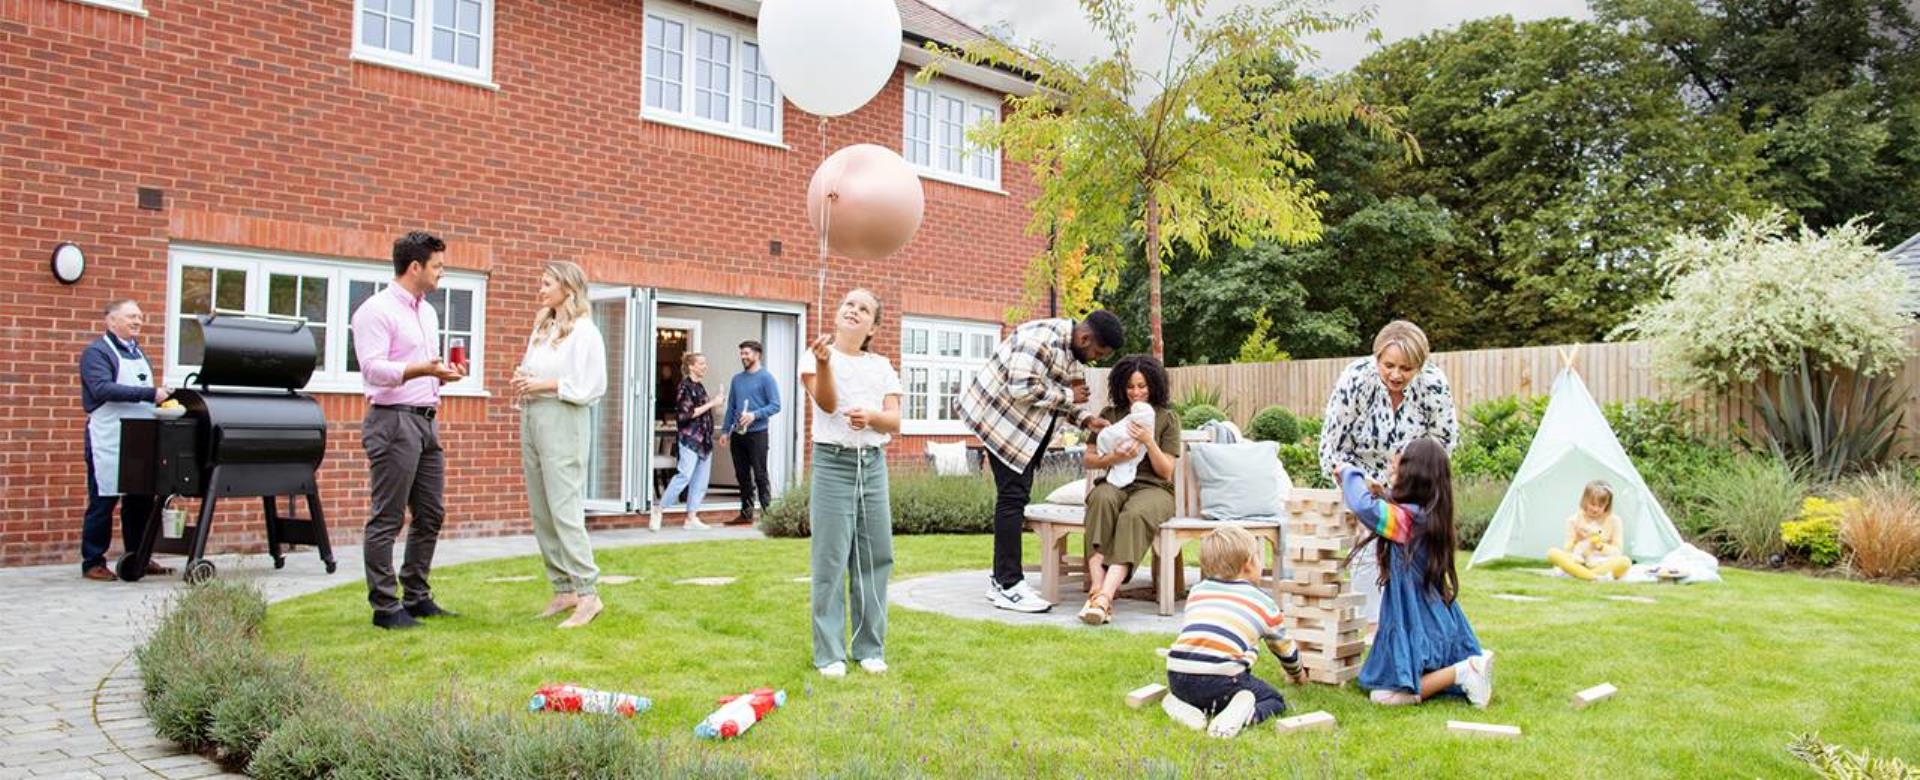 Redrow - New Homes for Sale - Garden Party r